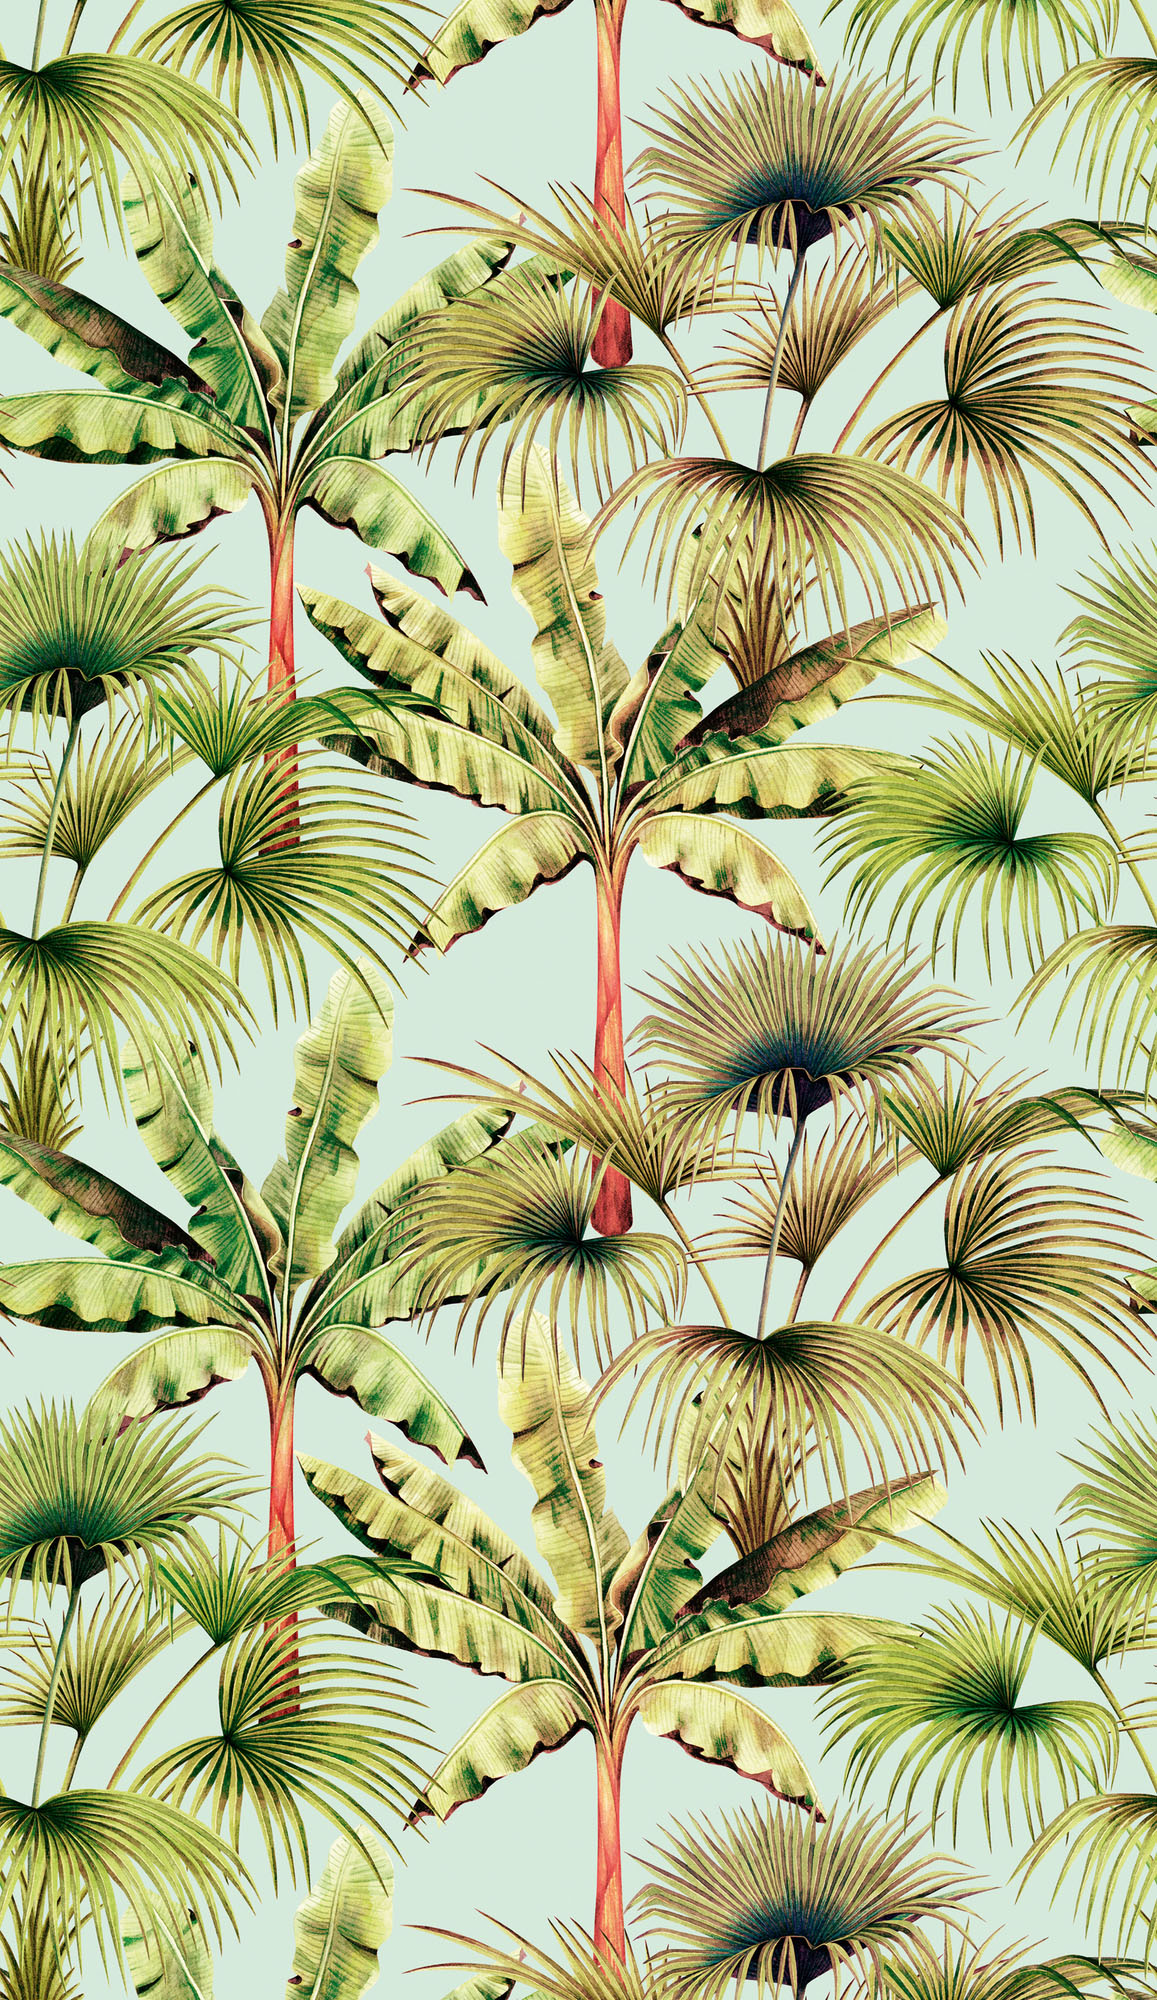 Watercolor,Colorful,Palm,banana,Leaves,Seamless,Pattern,Background.watercolor,Painting,Illustration,Tropical